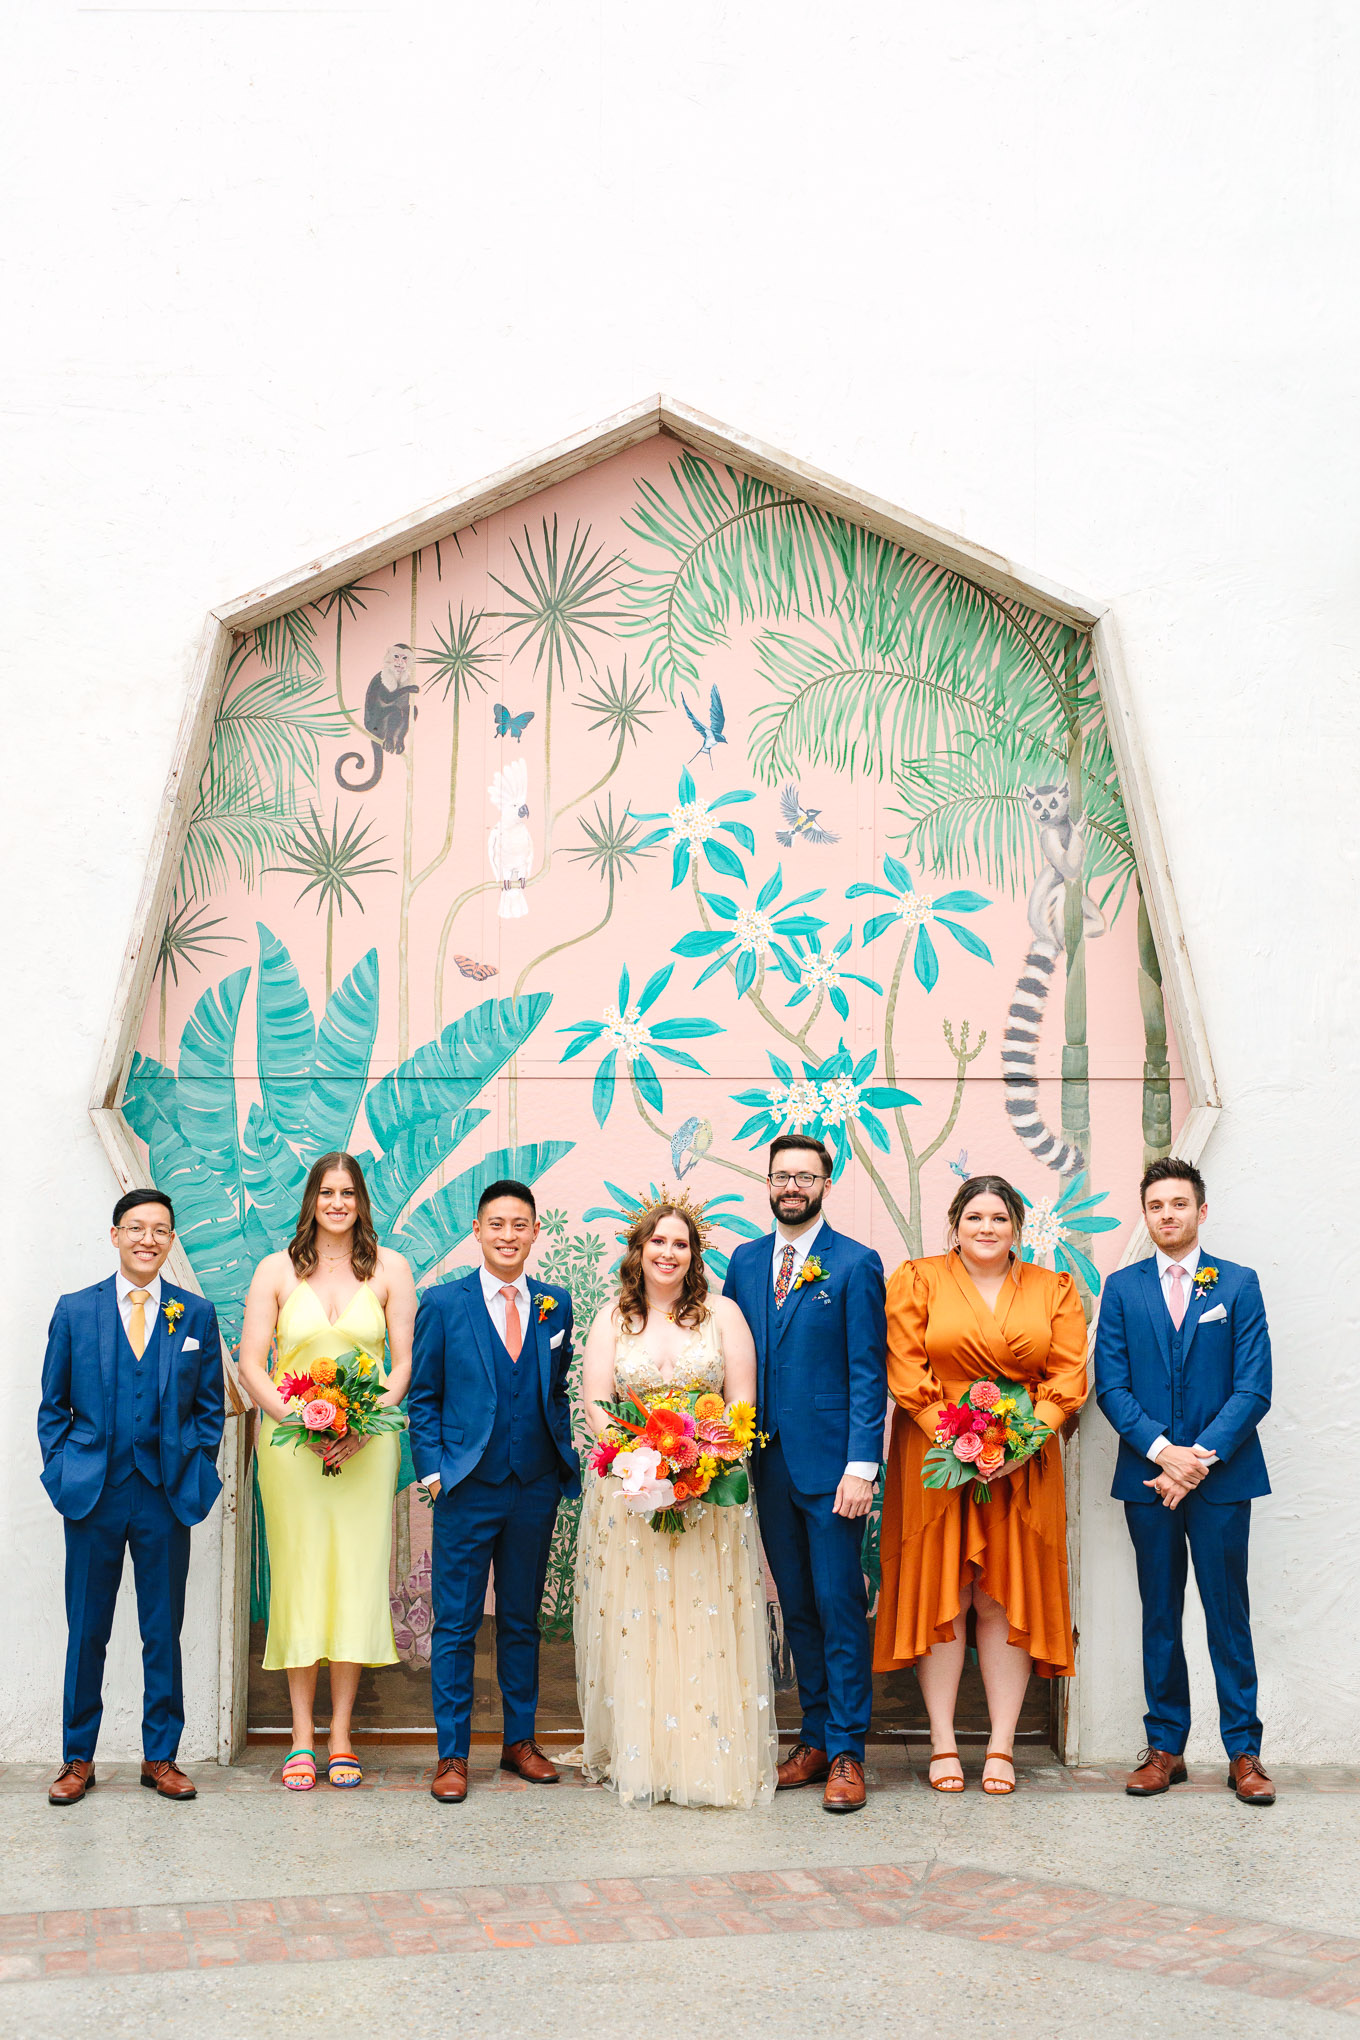 Colorful wedding party in front of mural | Colorful Downtown Los Angeles Valentine Wedding | Los Angeles wedding photographer | #losangeleswedding #colorfulwedding #DTLA #valentinedtla   Source: Mary Costa Photography | Los Angeles